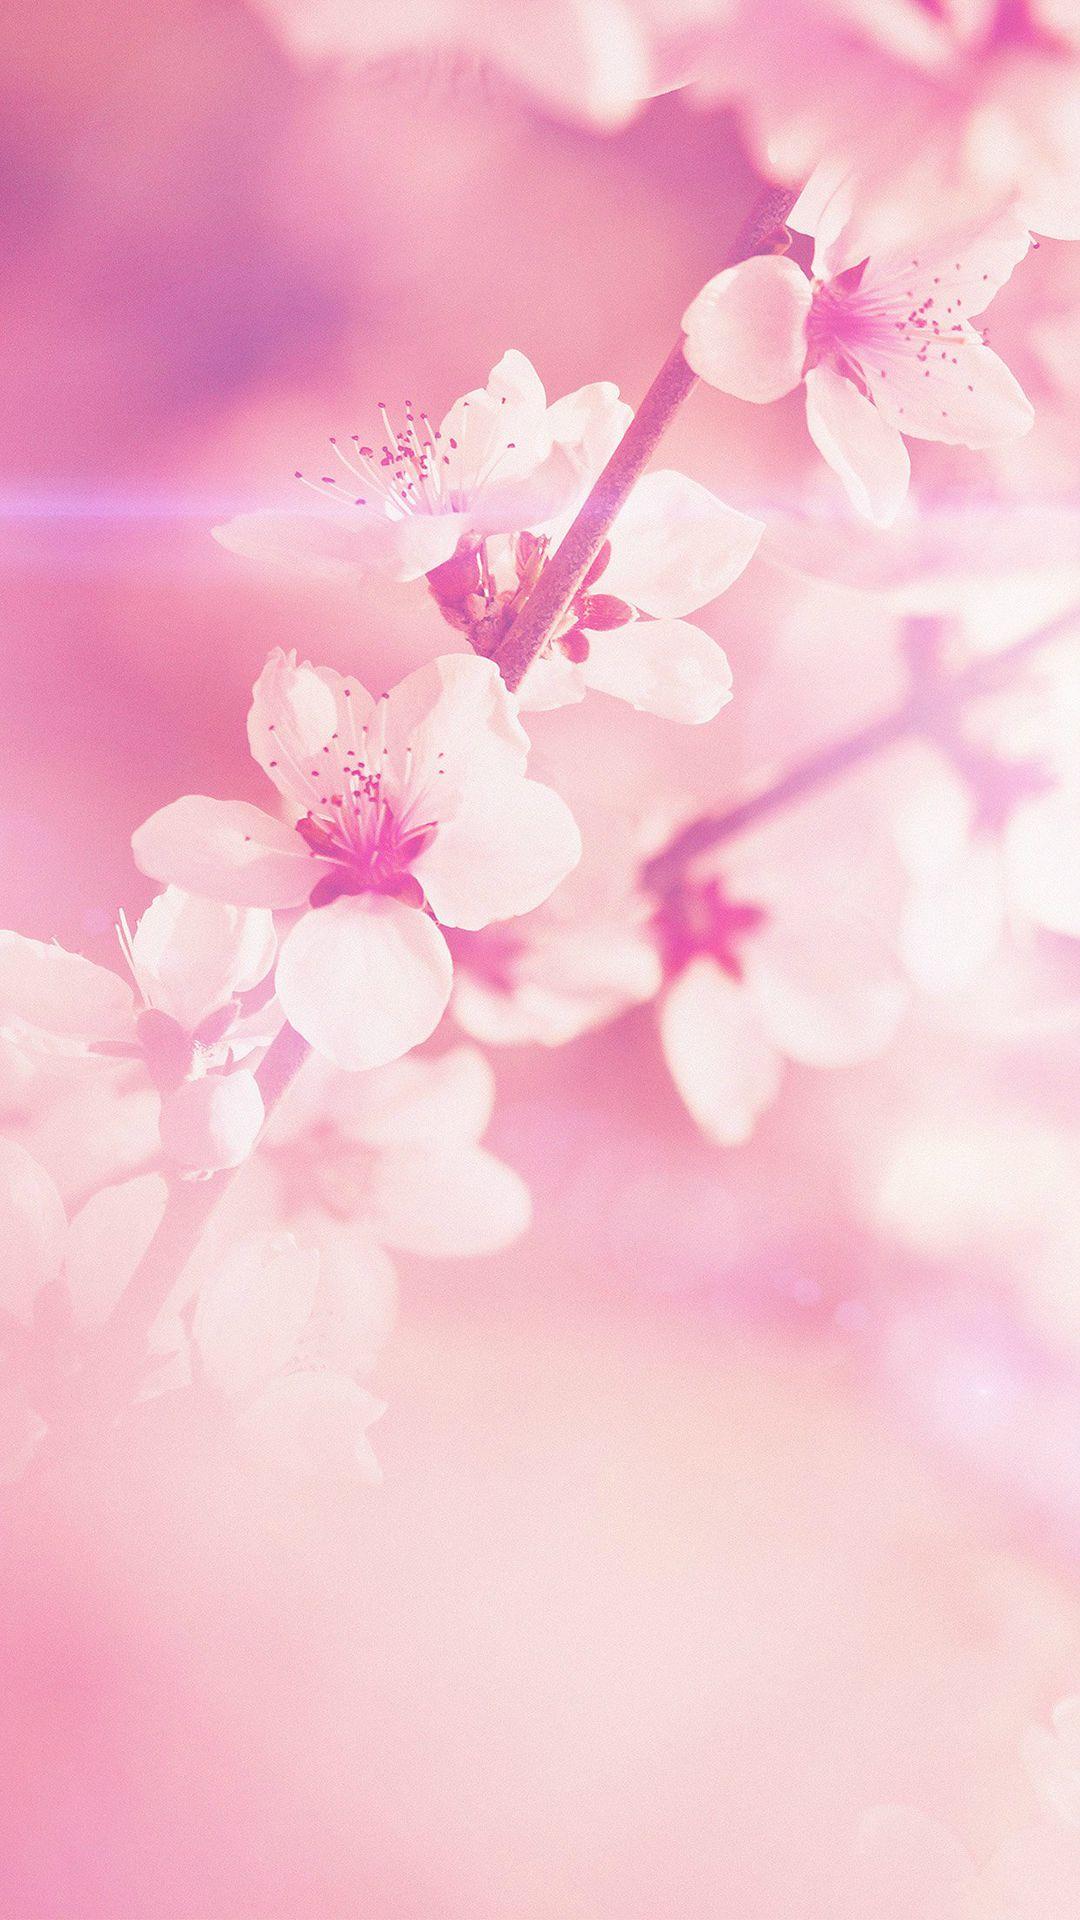 Light Pink Floral iPhone Wallpapers - Top Free Light Pink Floral iPhone Backgrounds